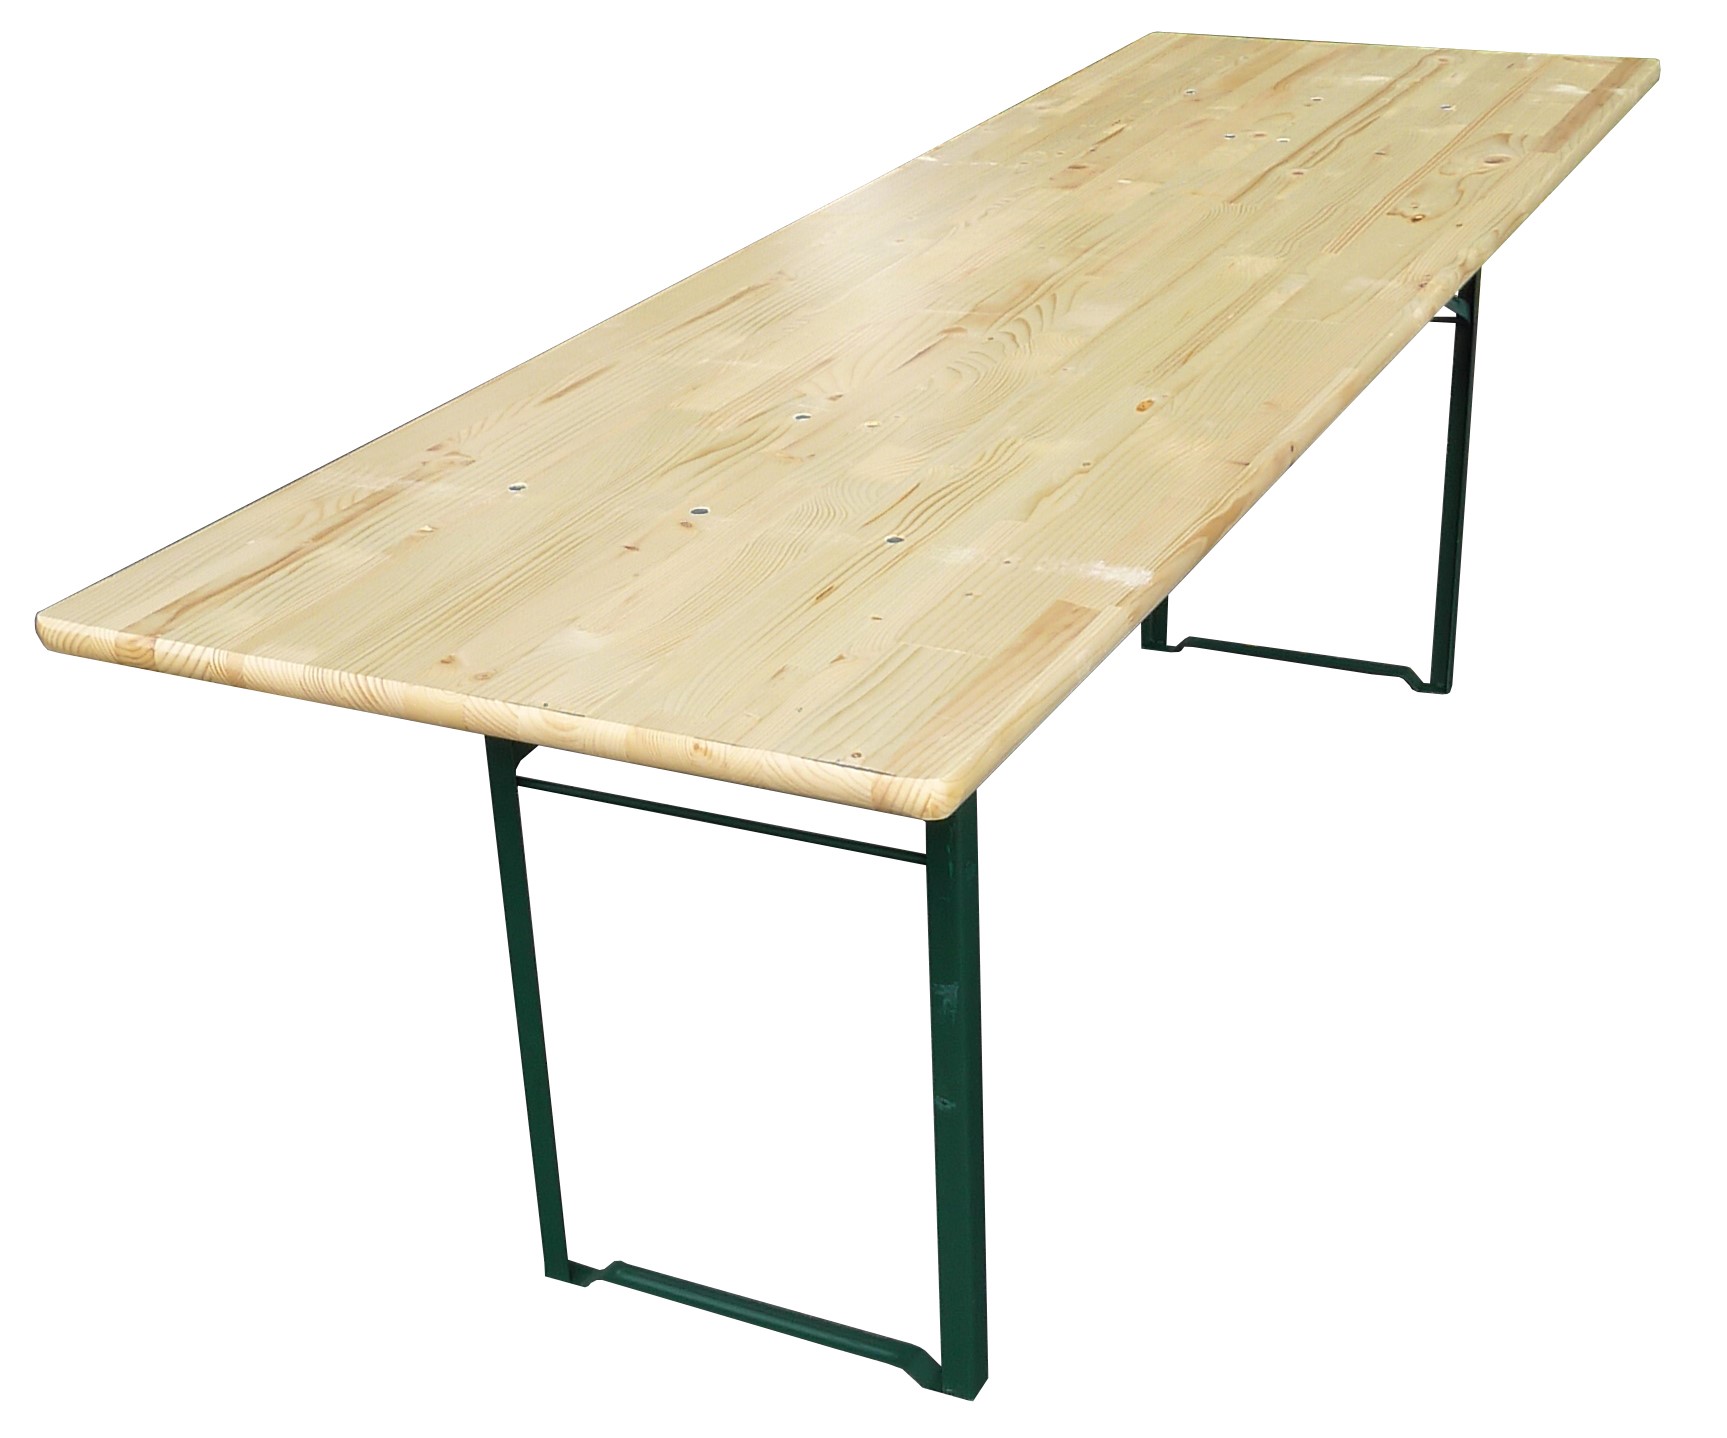 7,2ft Beer set table 220x80cm (benches sold separately) / steel corner legs